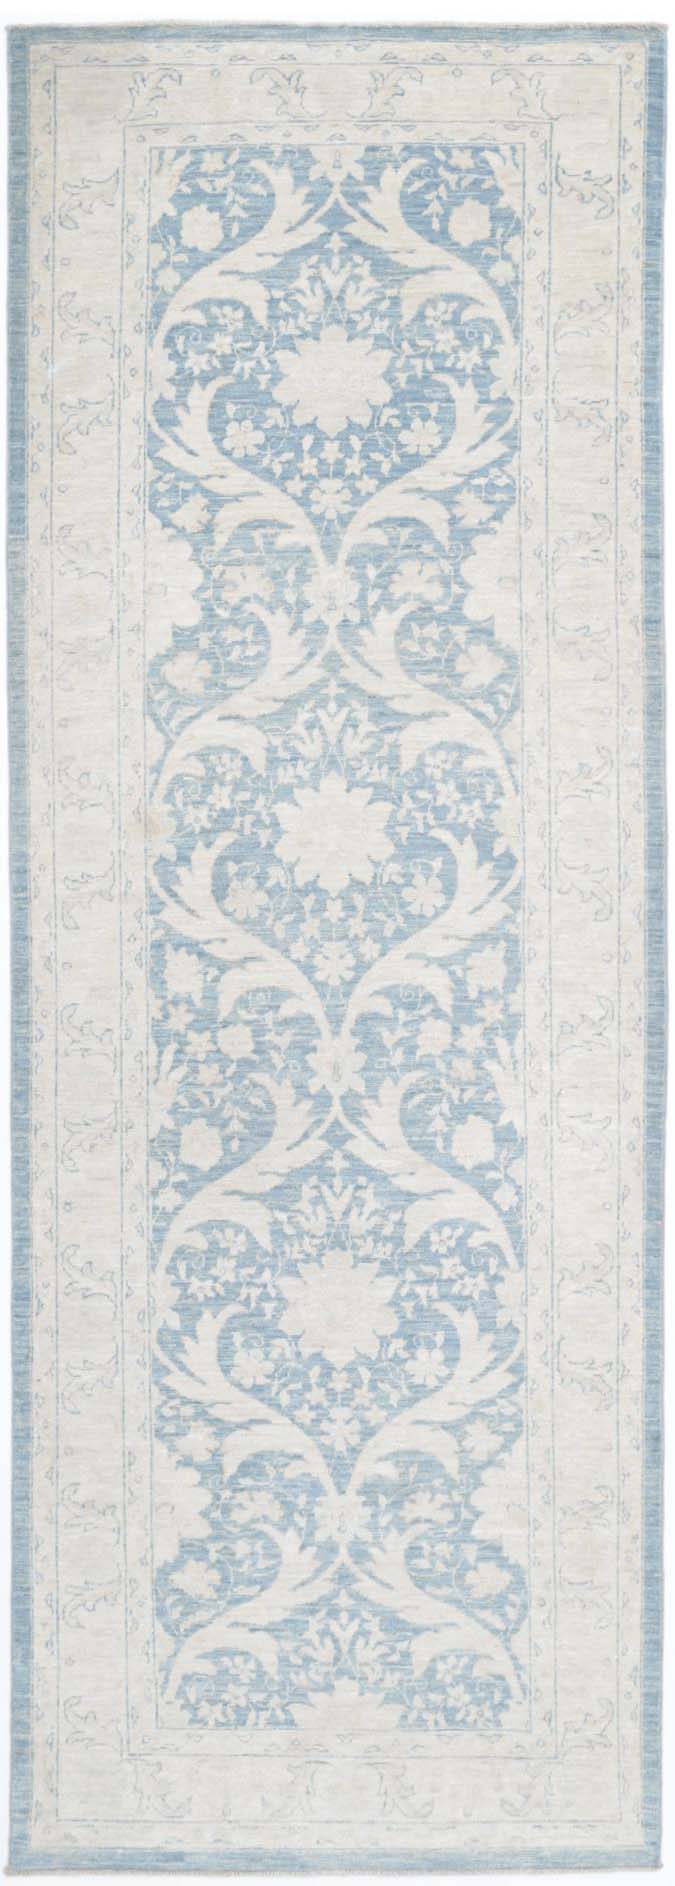 Hand Knotted Fine Serenity Wool Rug - 3'3'' x 9'8''